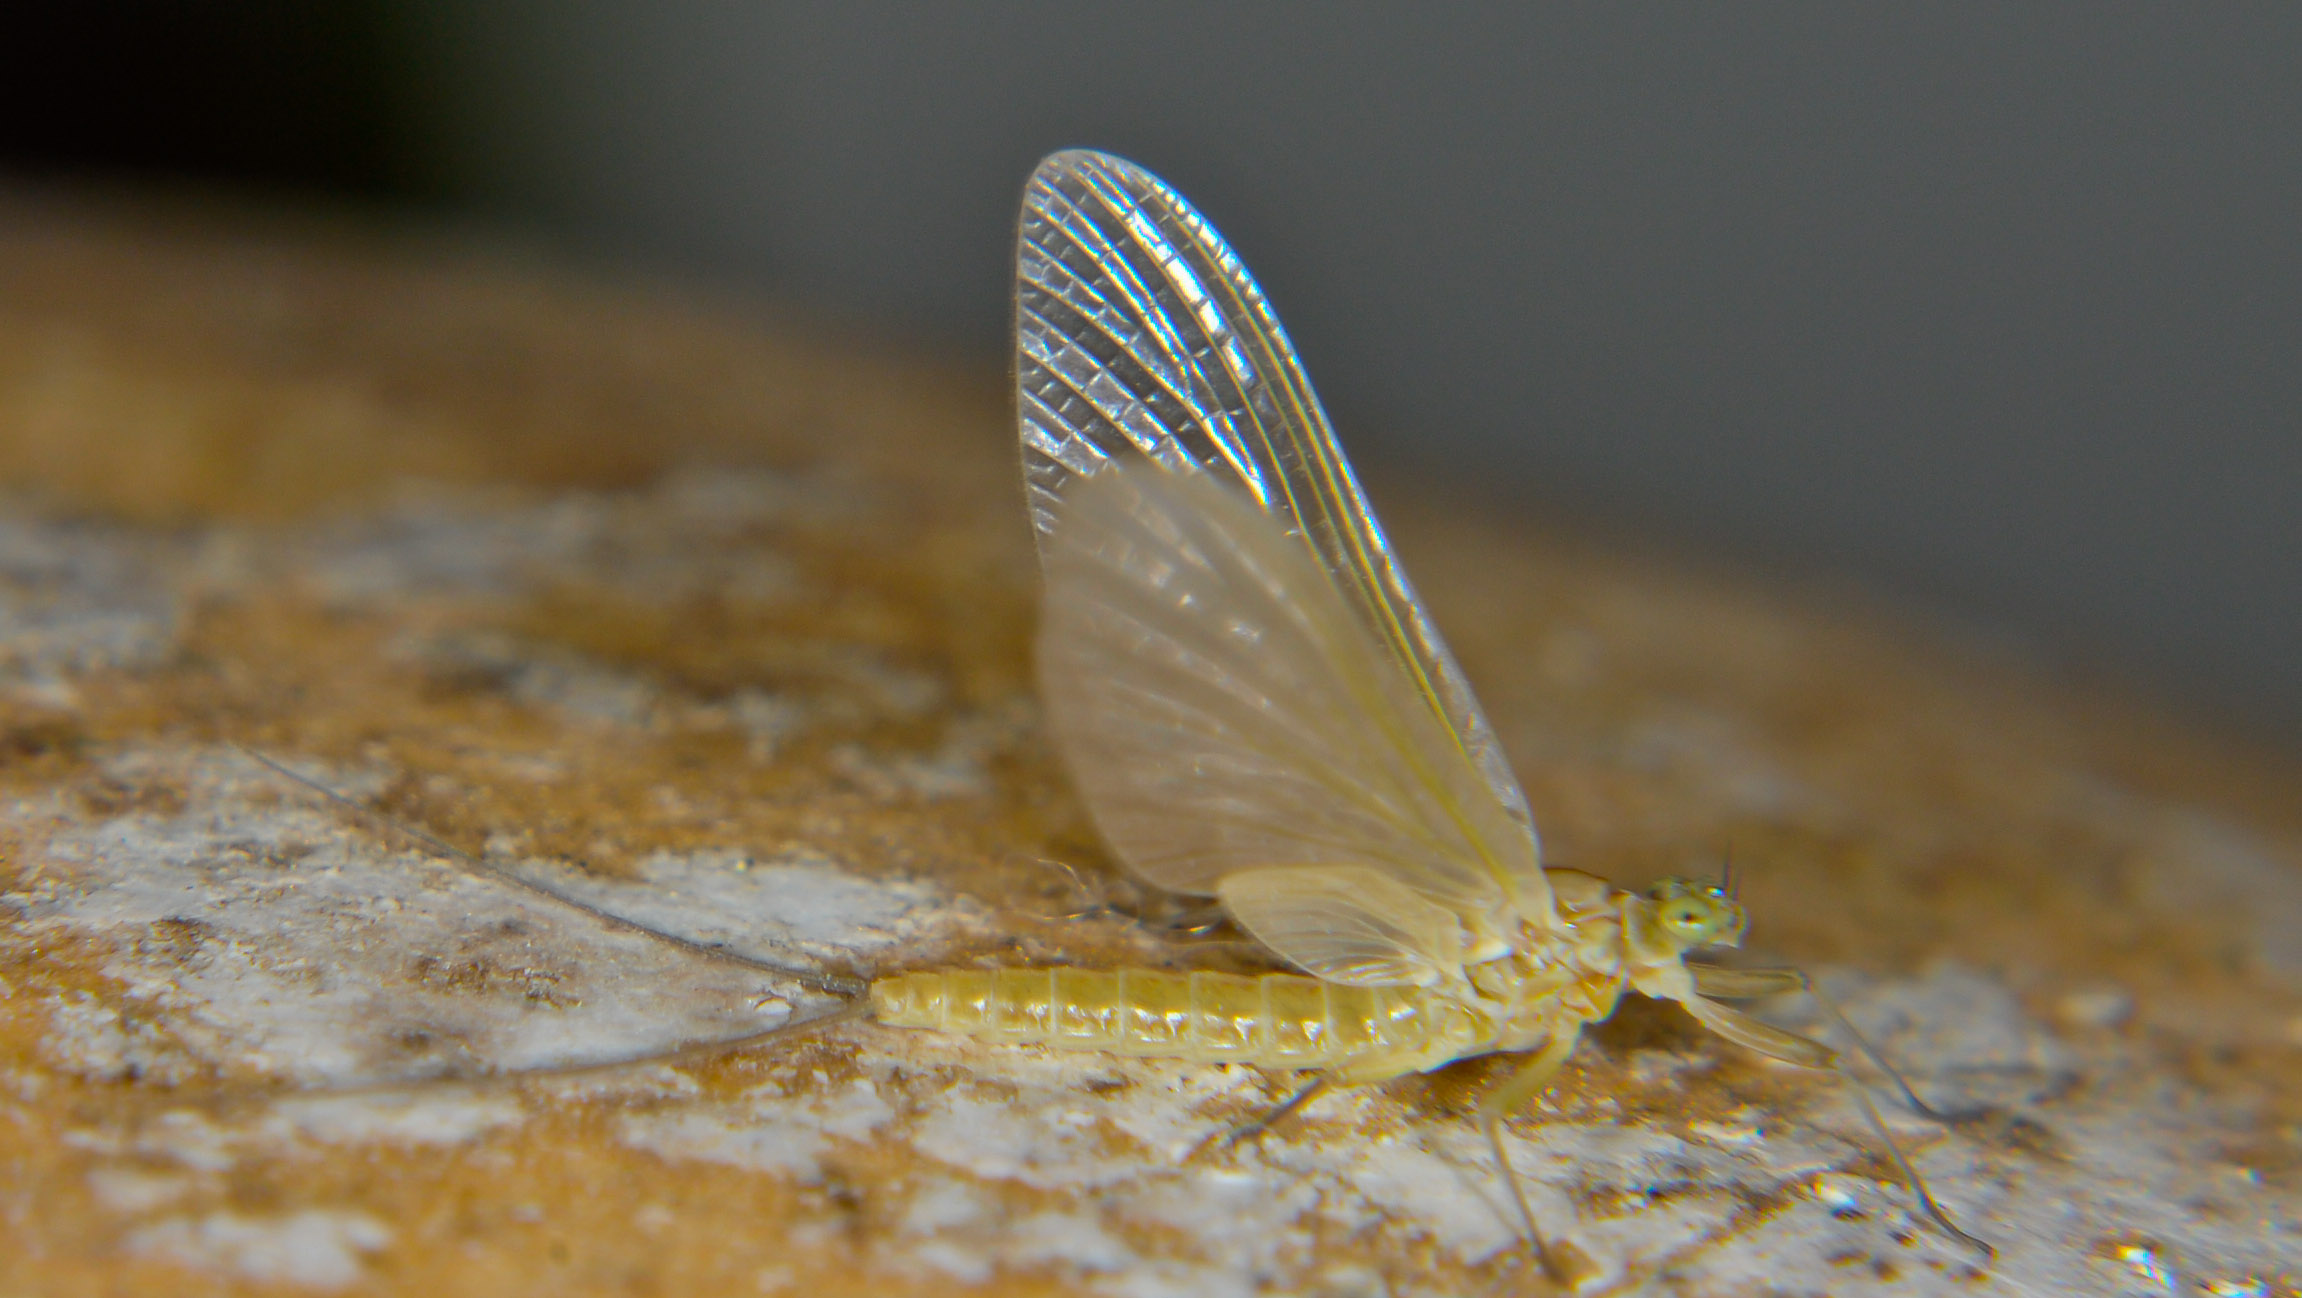 Female Epeorus albertae (Pink Lady) Mayfly Dun from the Touchet River in Washington